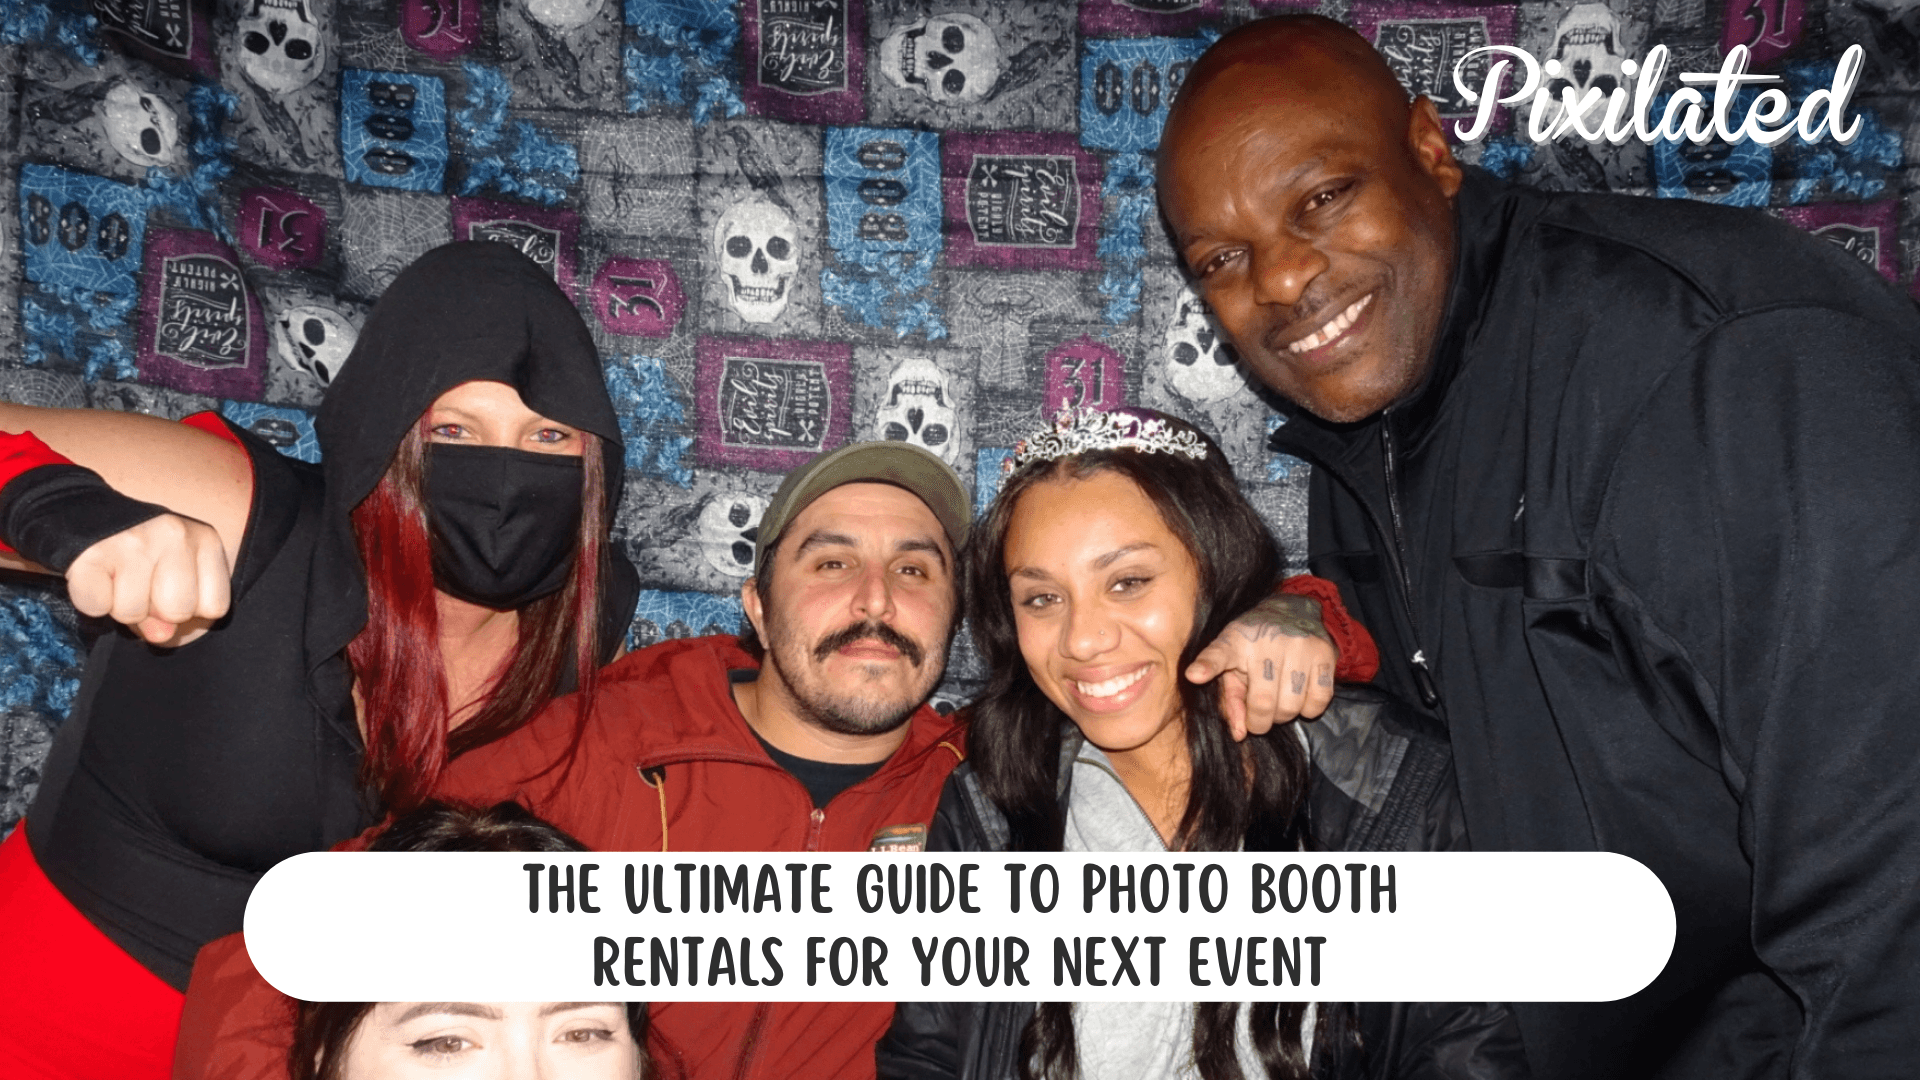 The Ultimate Guide To Photo Booth Rentals For Your Next Event 965746 ?v=1675806637